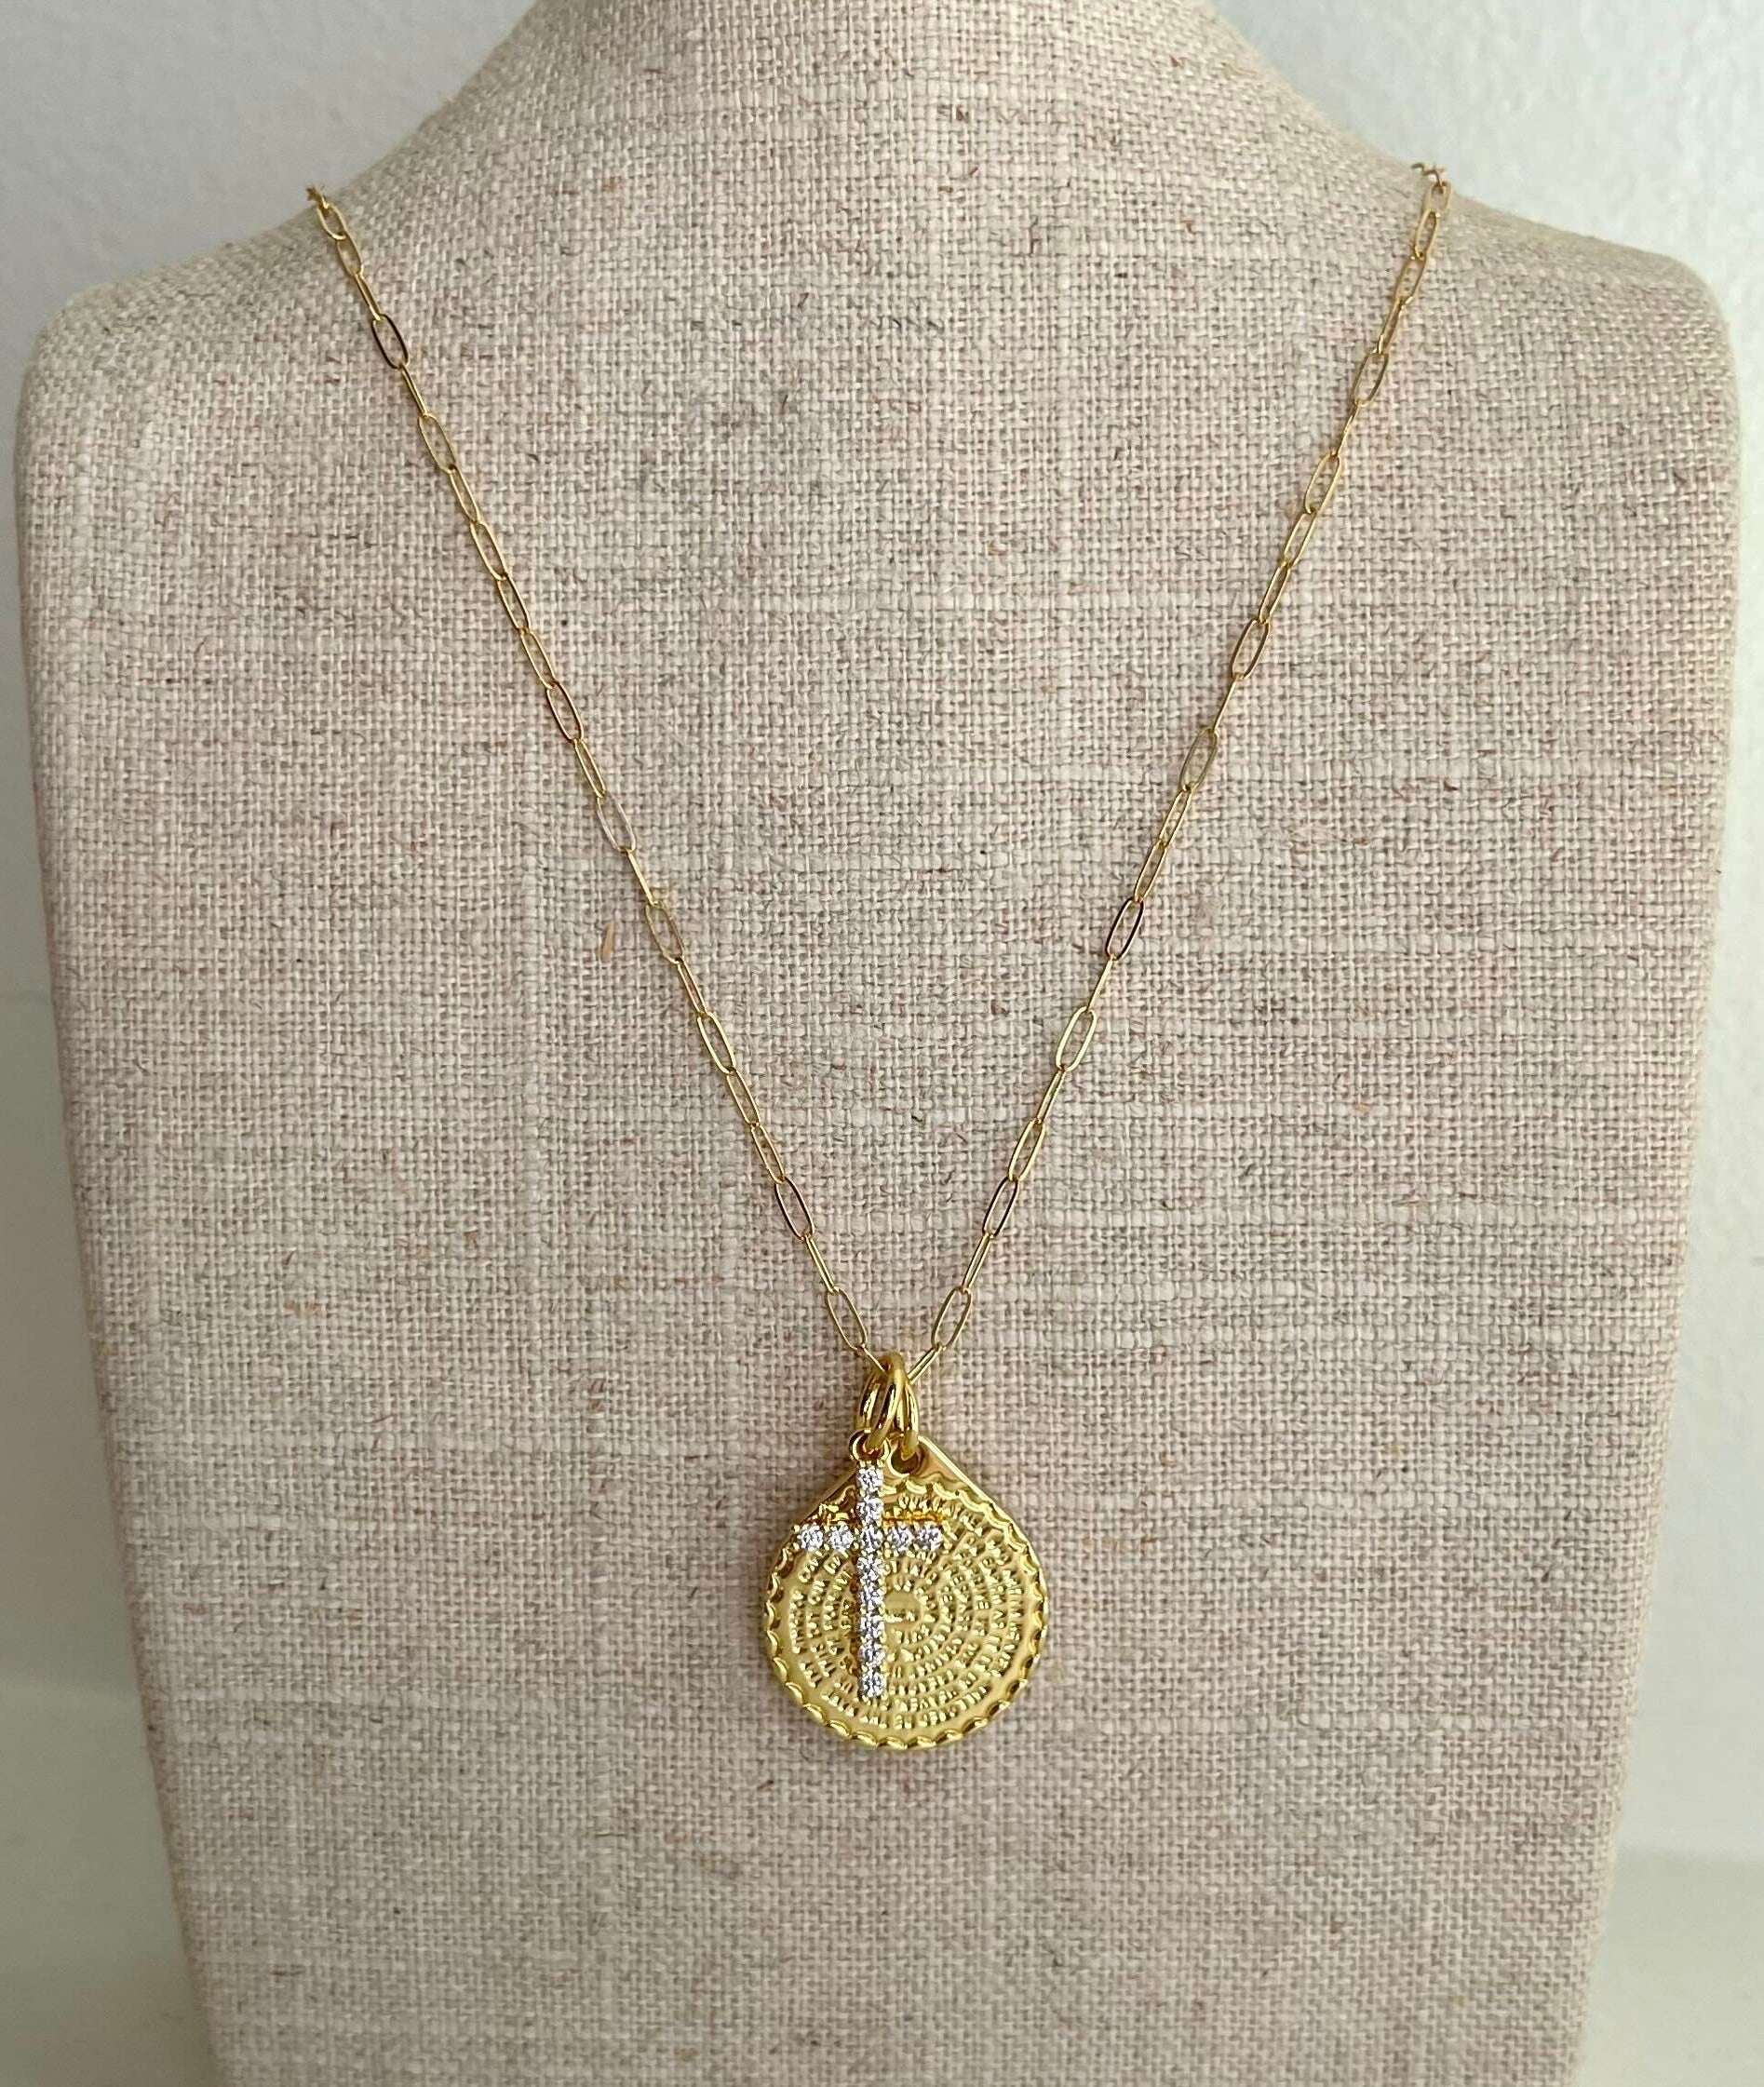 Allison Avery Lord's Prayer Necklace - 14K Gold Filled with Engravings